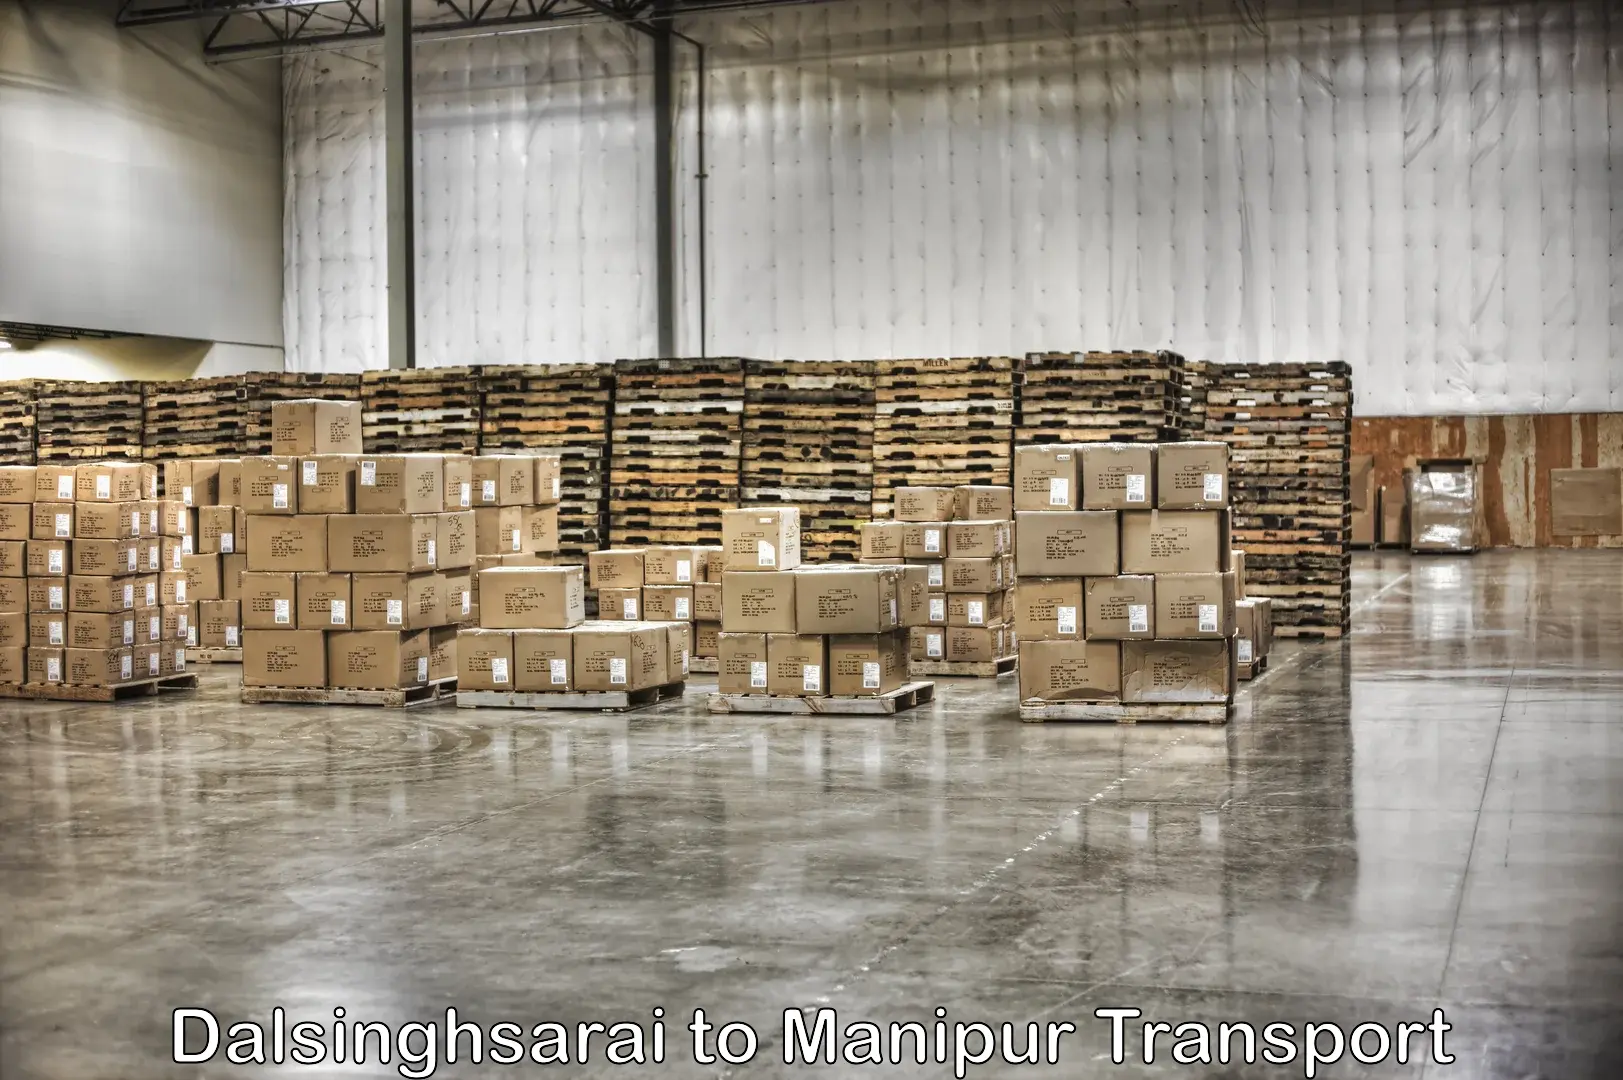 Air freight transport services Dalsinghsarai to Kanti